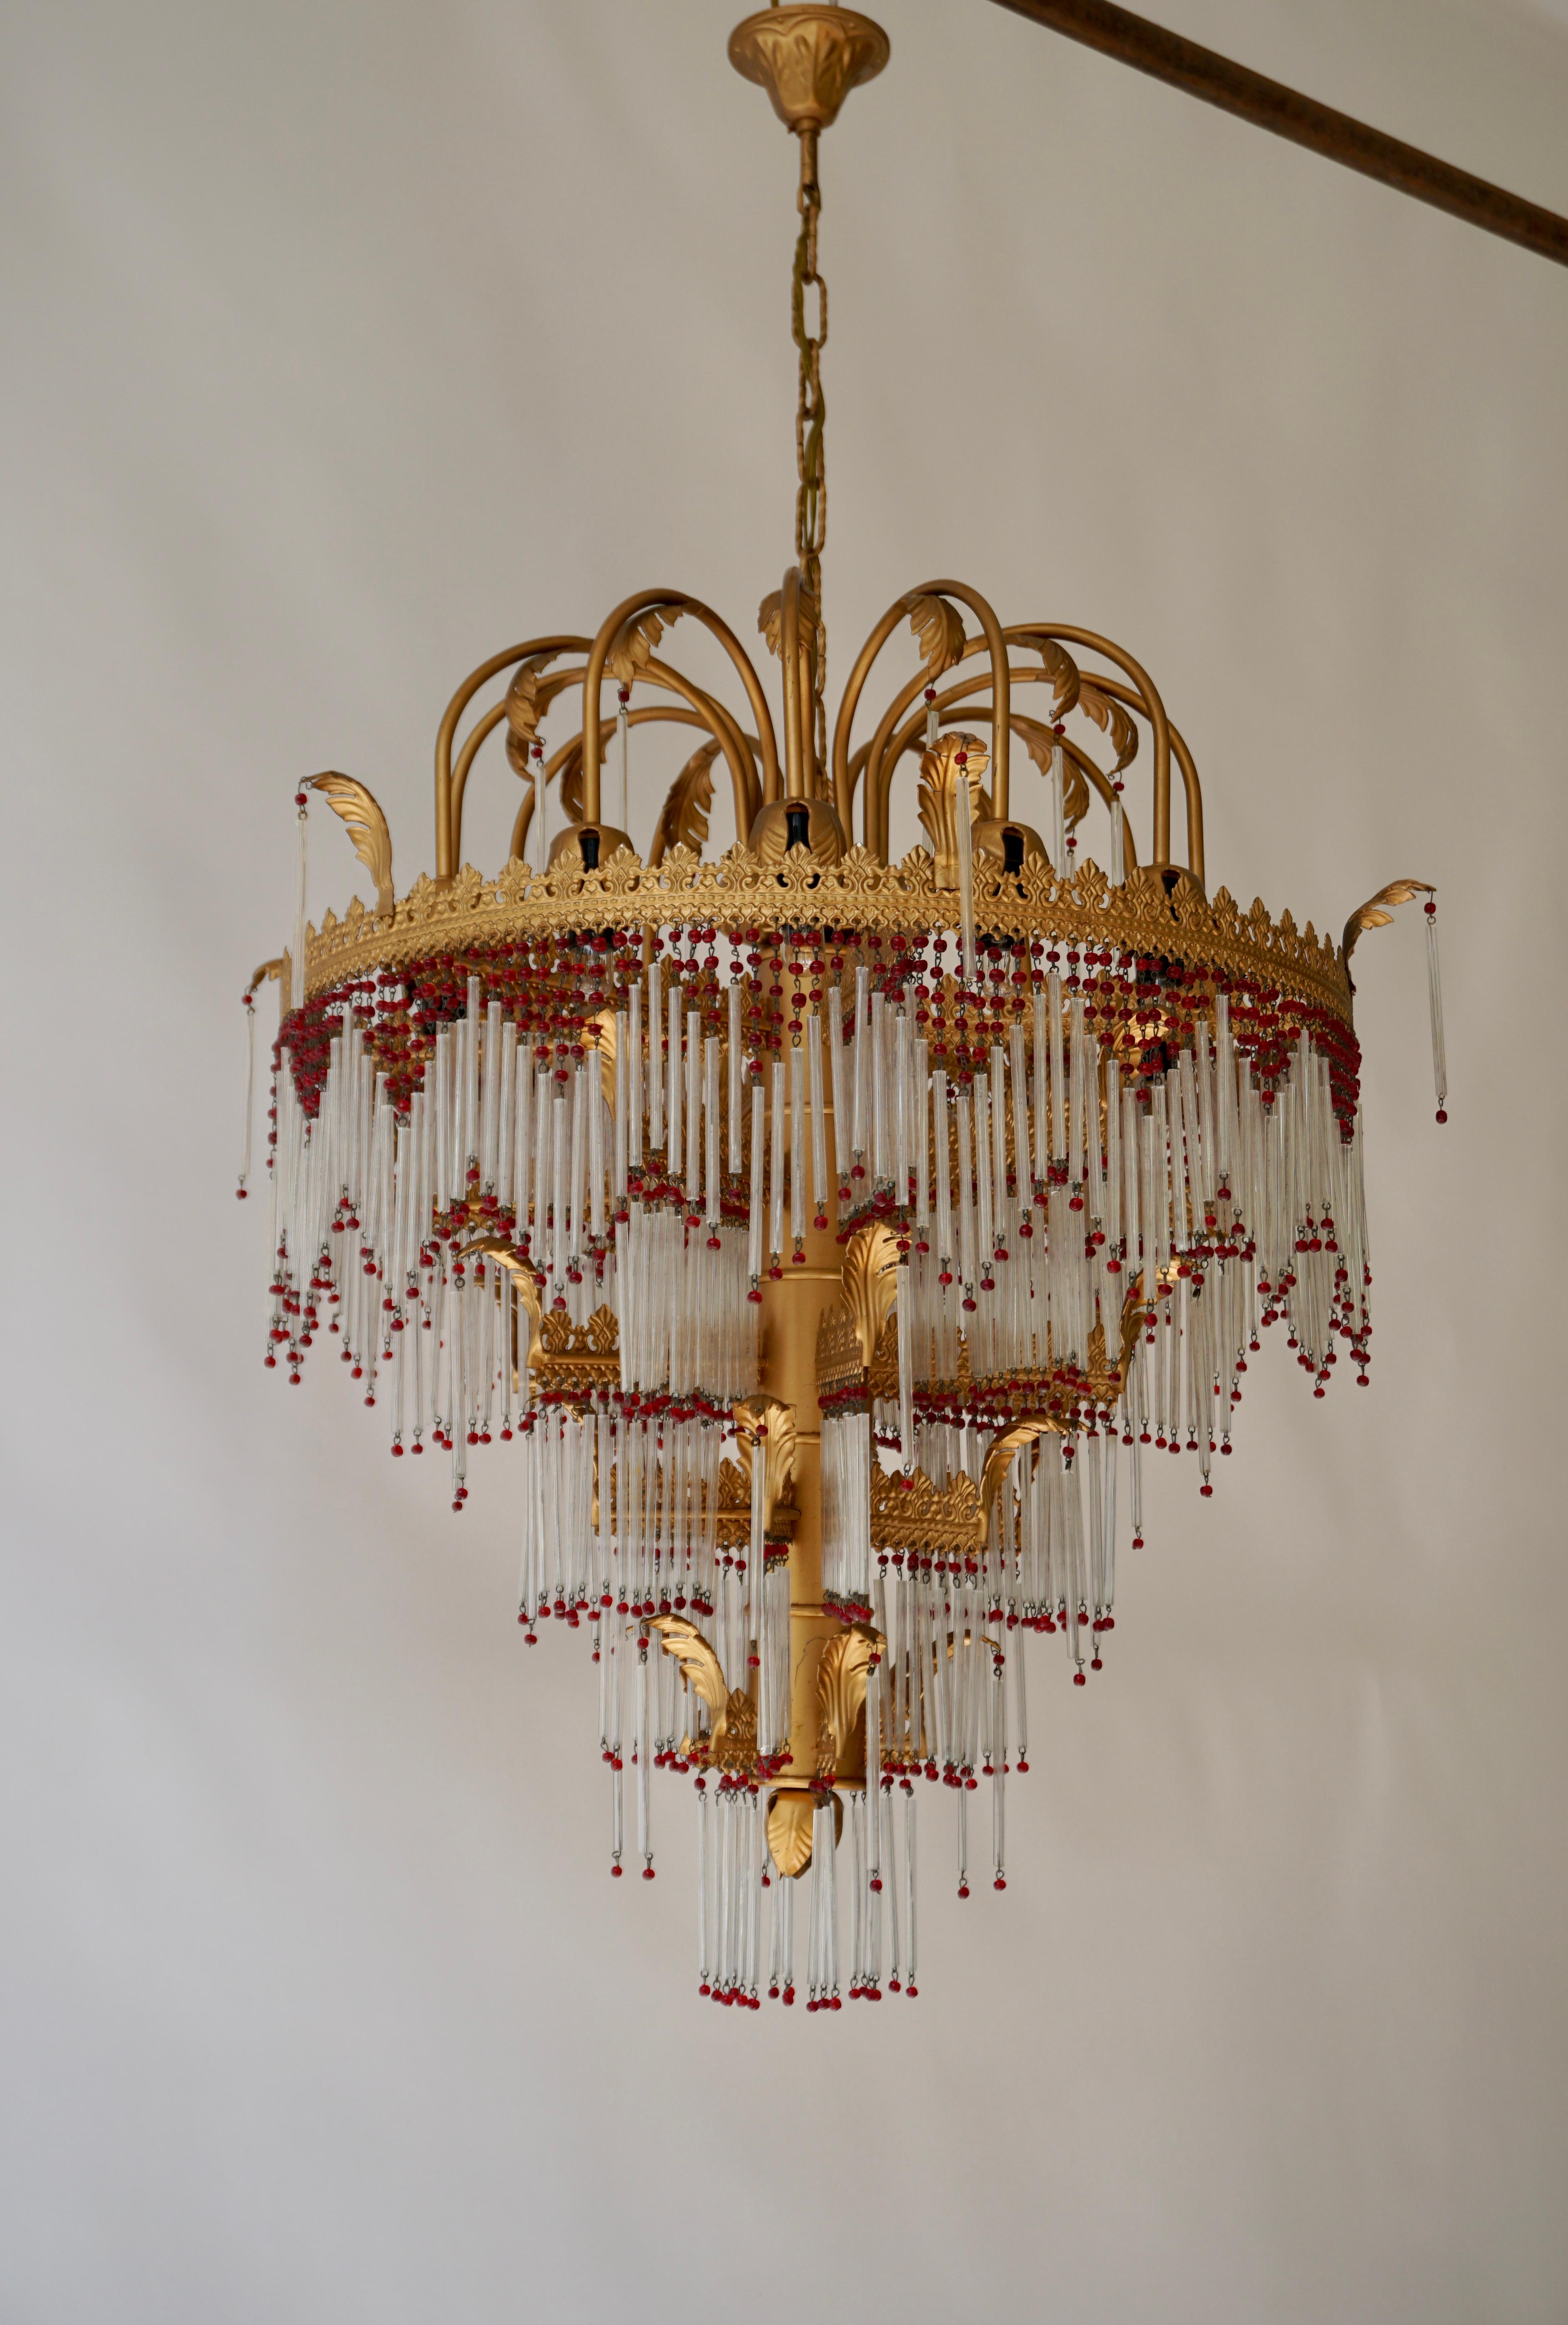 Large Italian Art nouveau style Murano glass and brass chandelier. 

The light requires 12 single E14 screw fit lightbulbs (60Watt max.) LED compatible. 

Measures: 
Diameter 64 cm. 
Height fixture 65 cm. 
Total height including the chain and